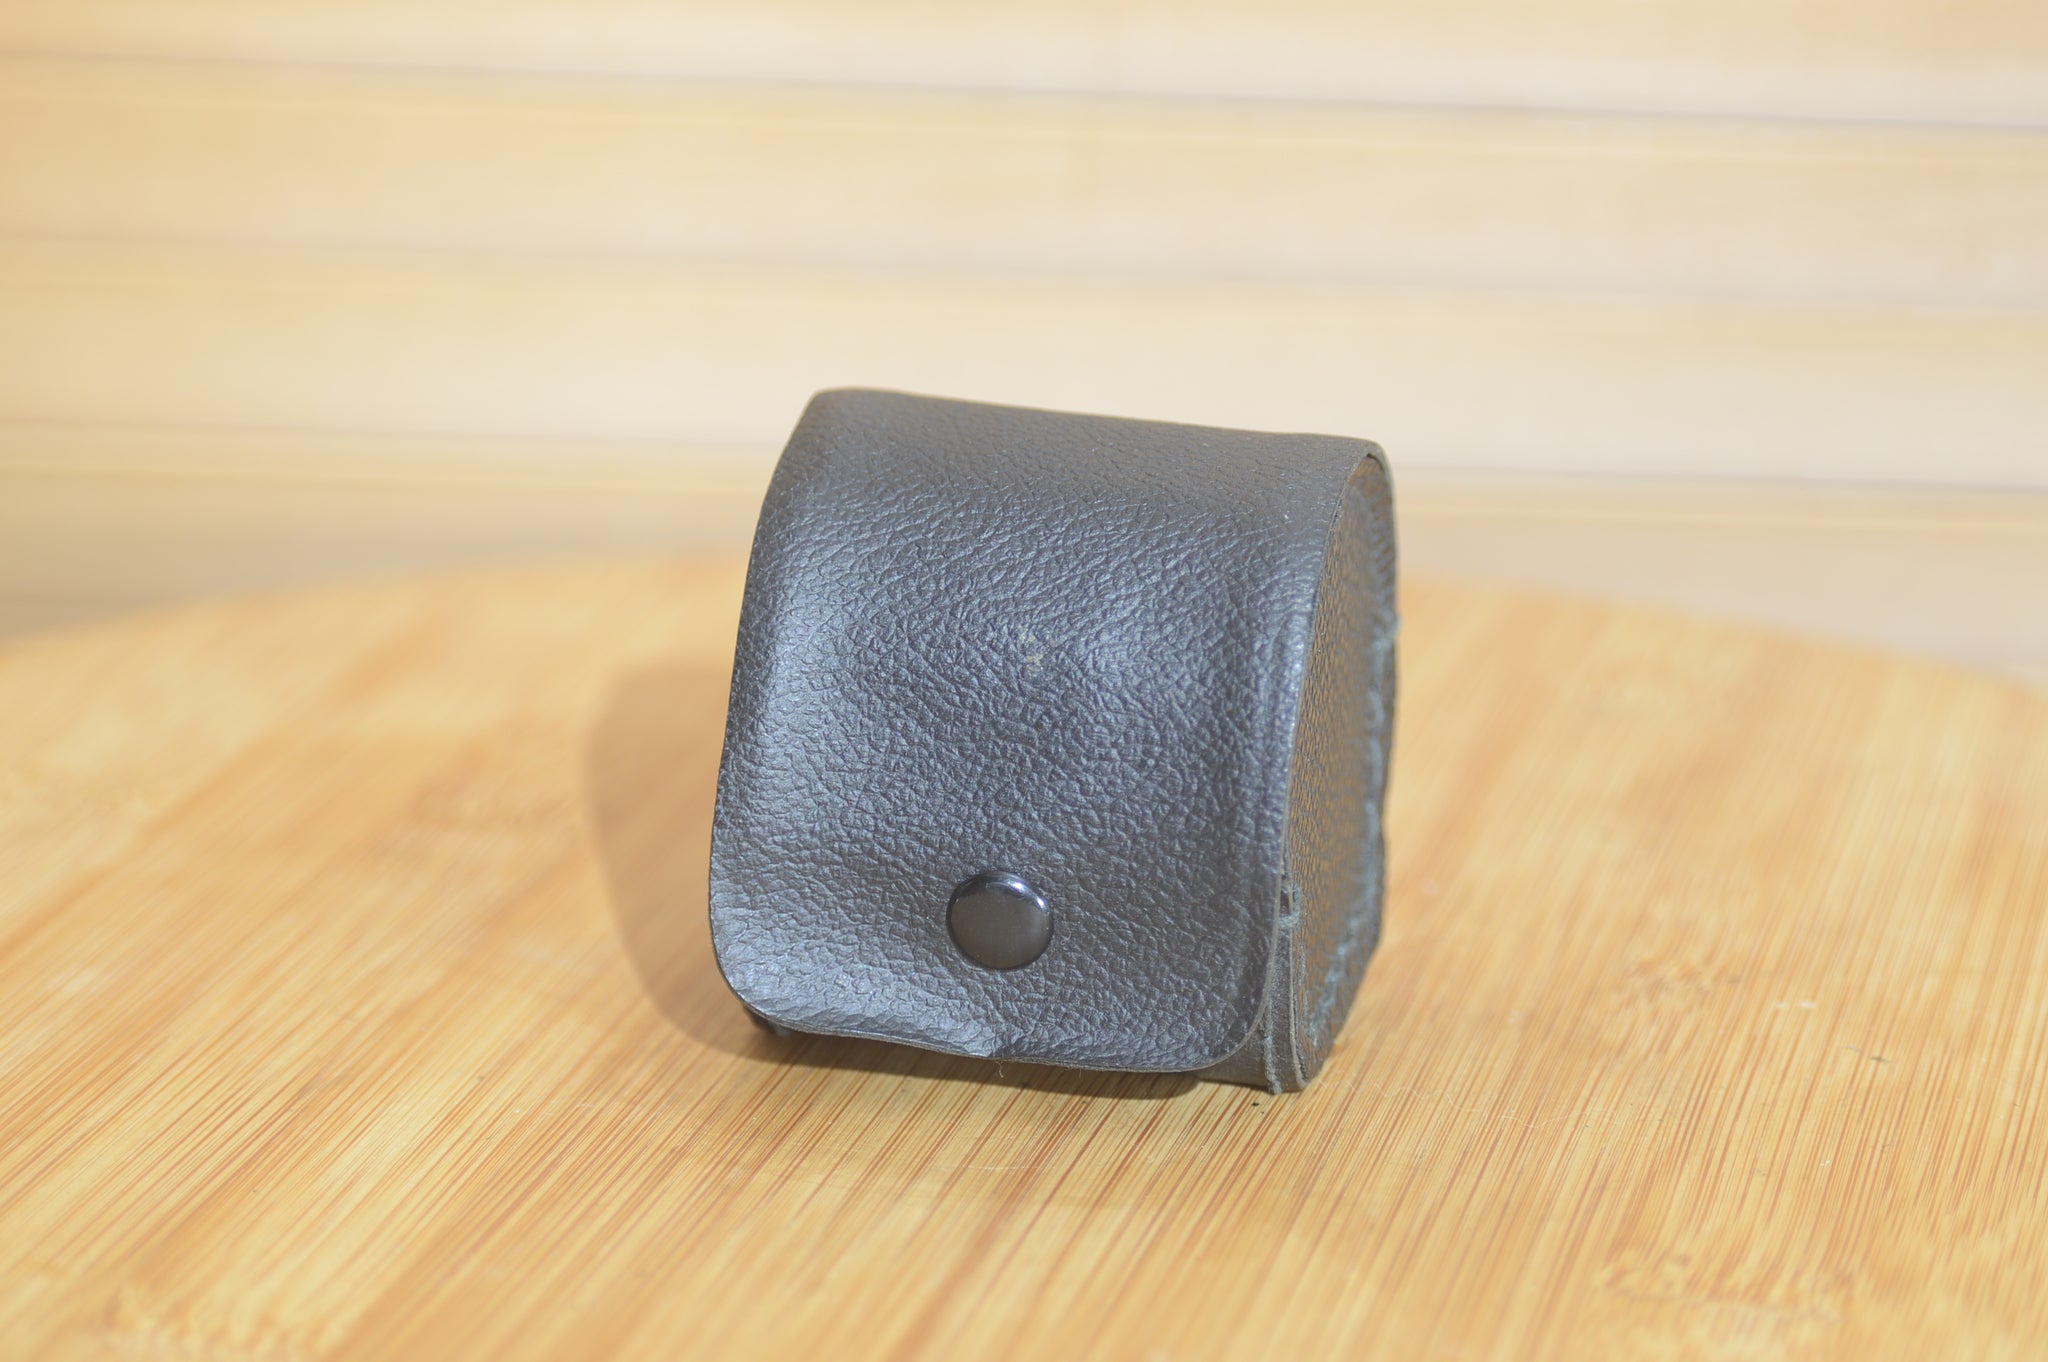 Vintage Black Leather Tele Converter Case. Perfect for protecting your extension tube. - Rewind Cameras 